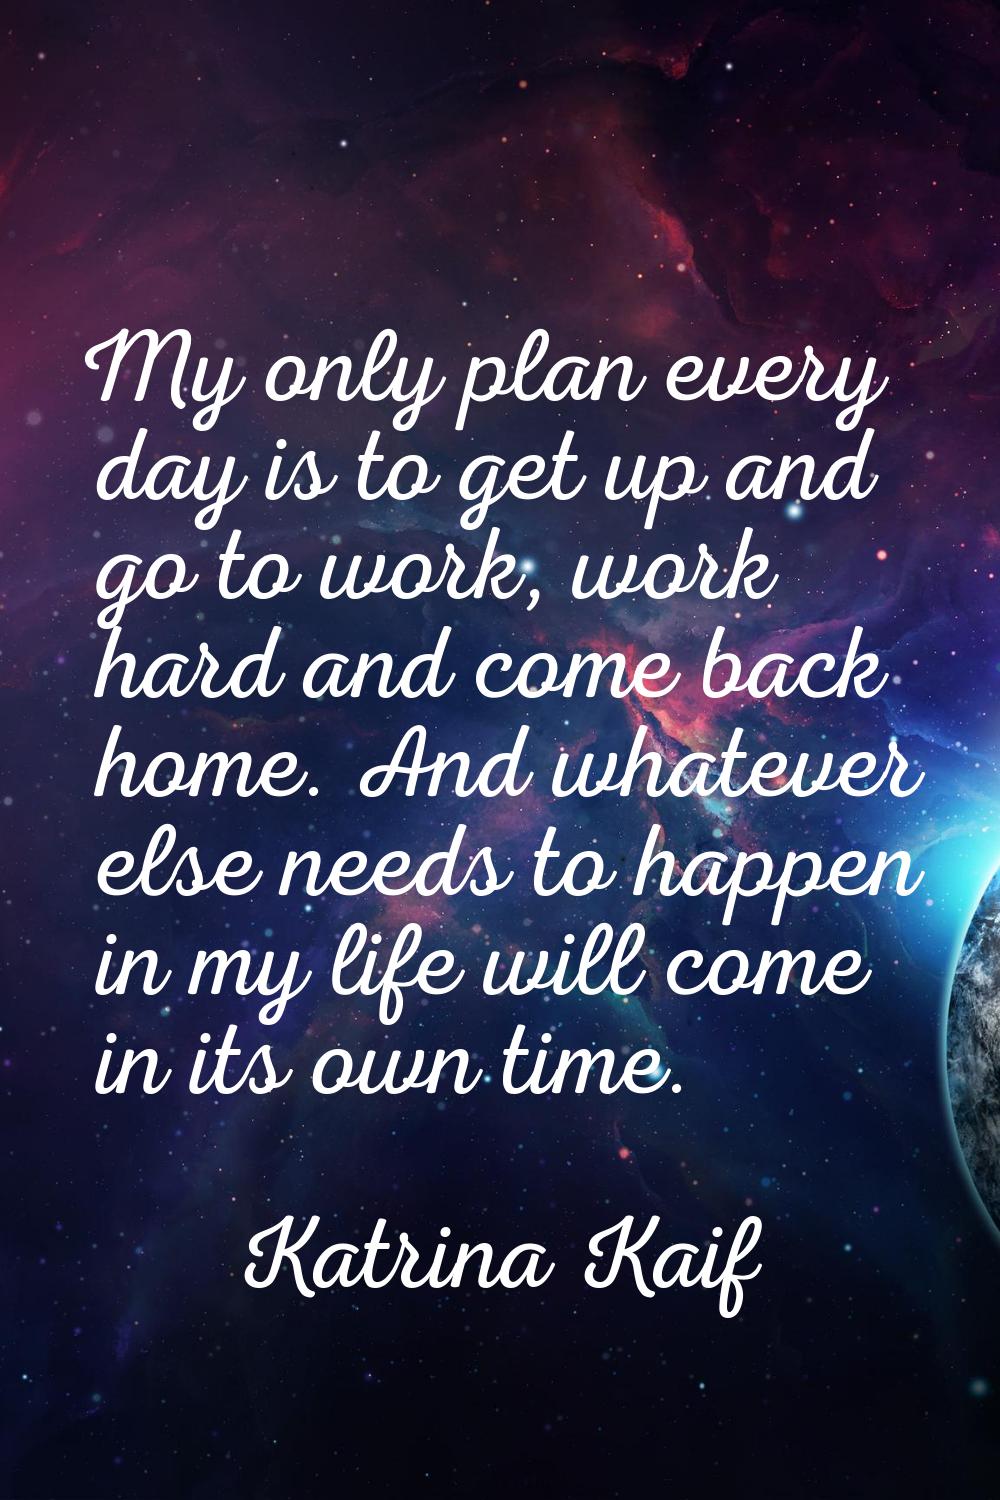 My only plan every day is to get up and go to work, work hard and come back home. And whatever else